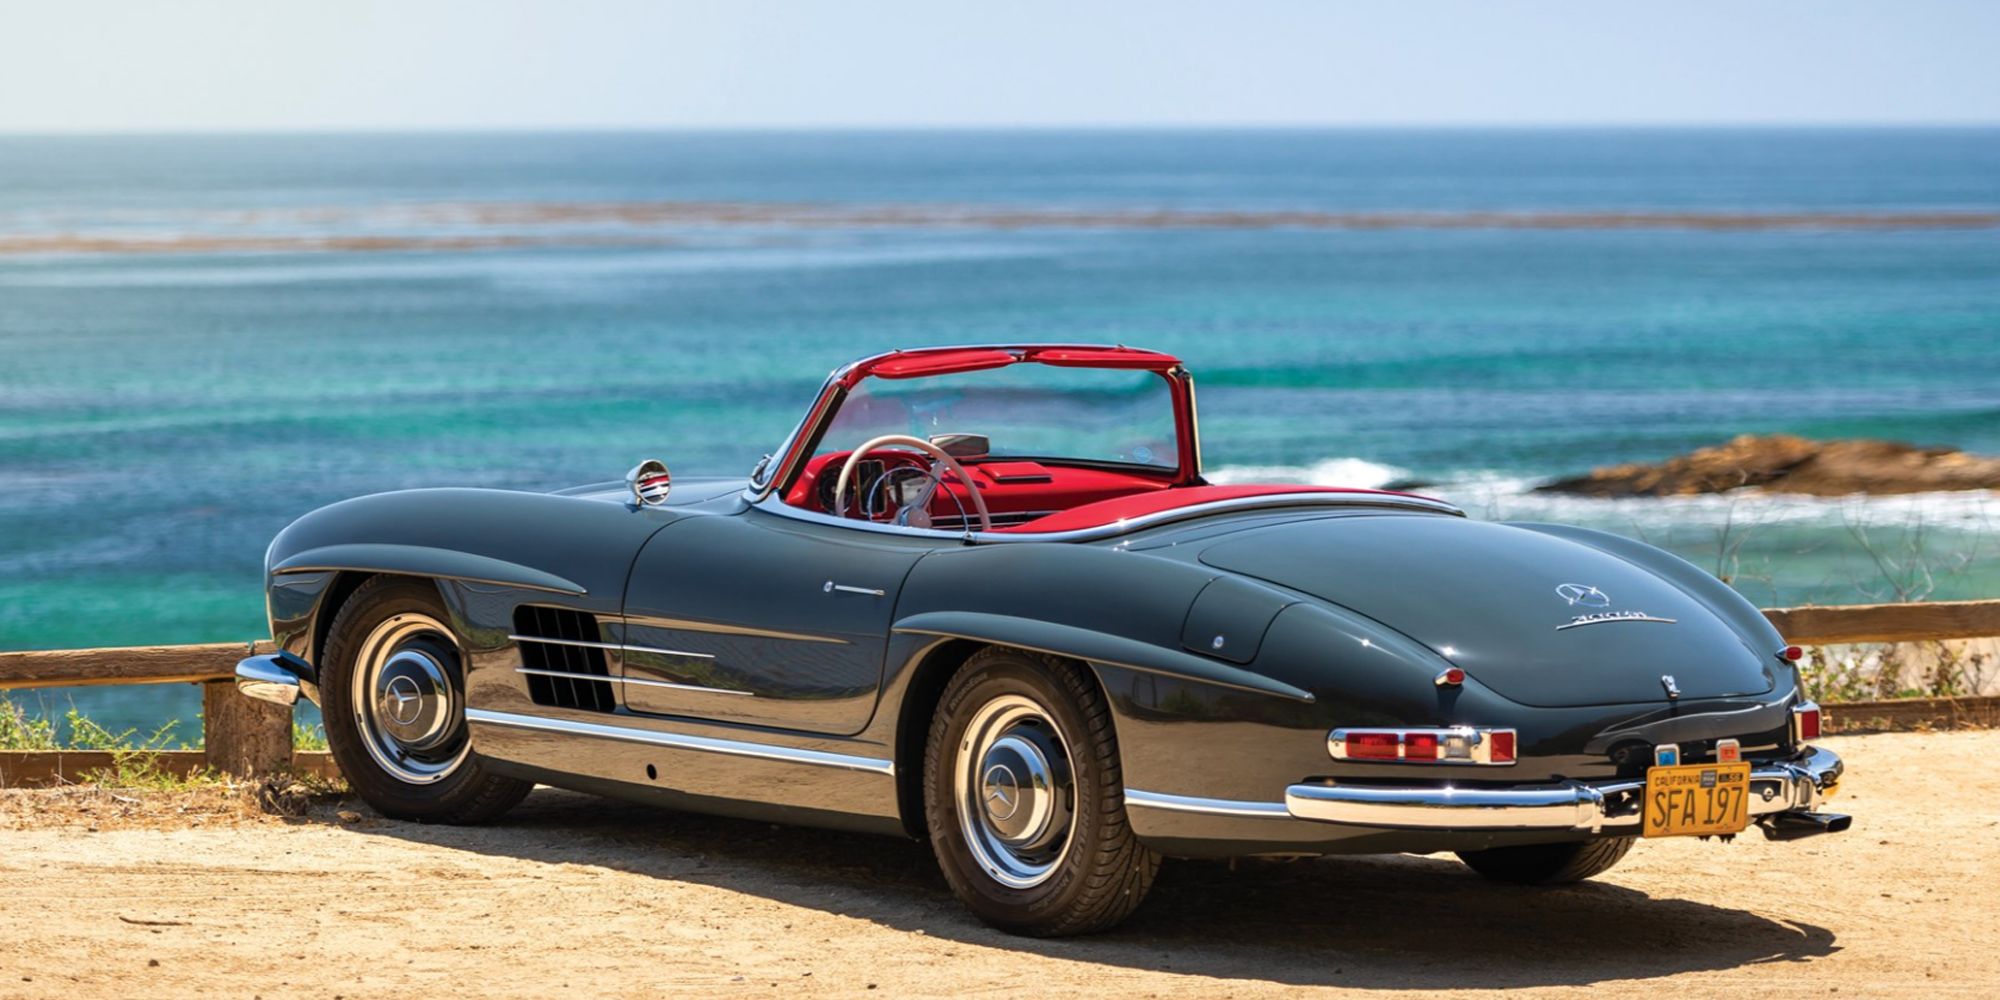 The rear of the 300SL Roadster